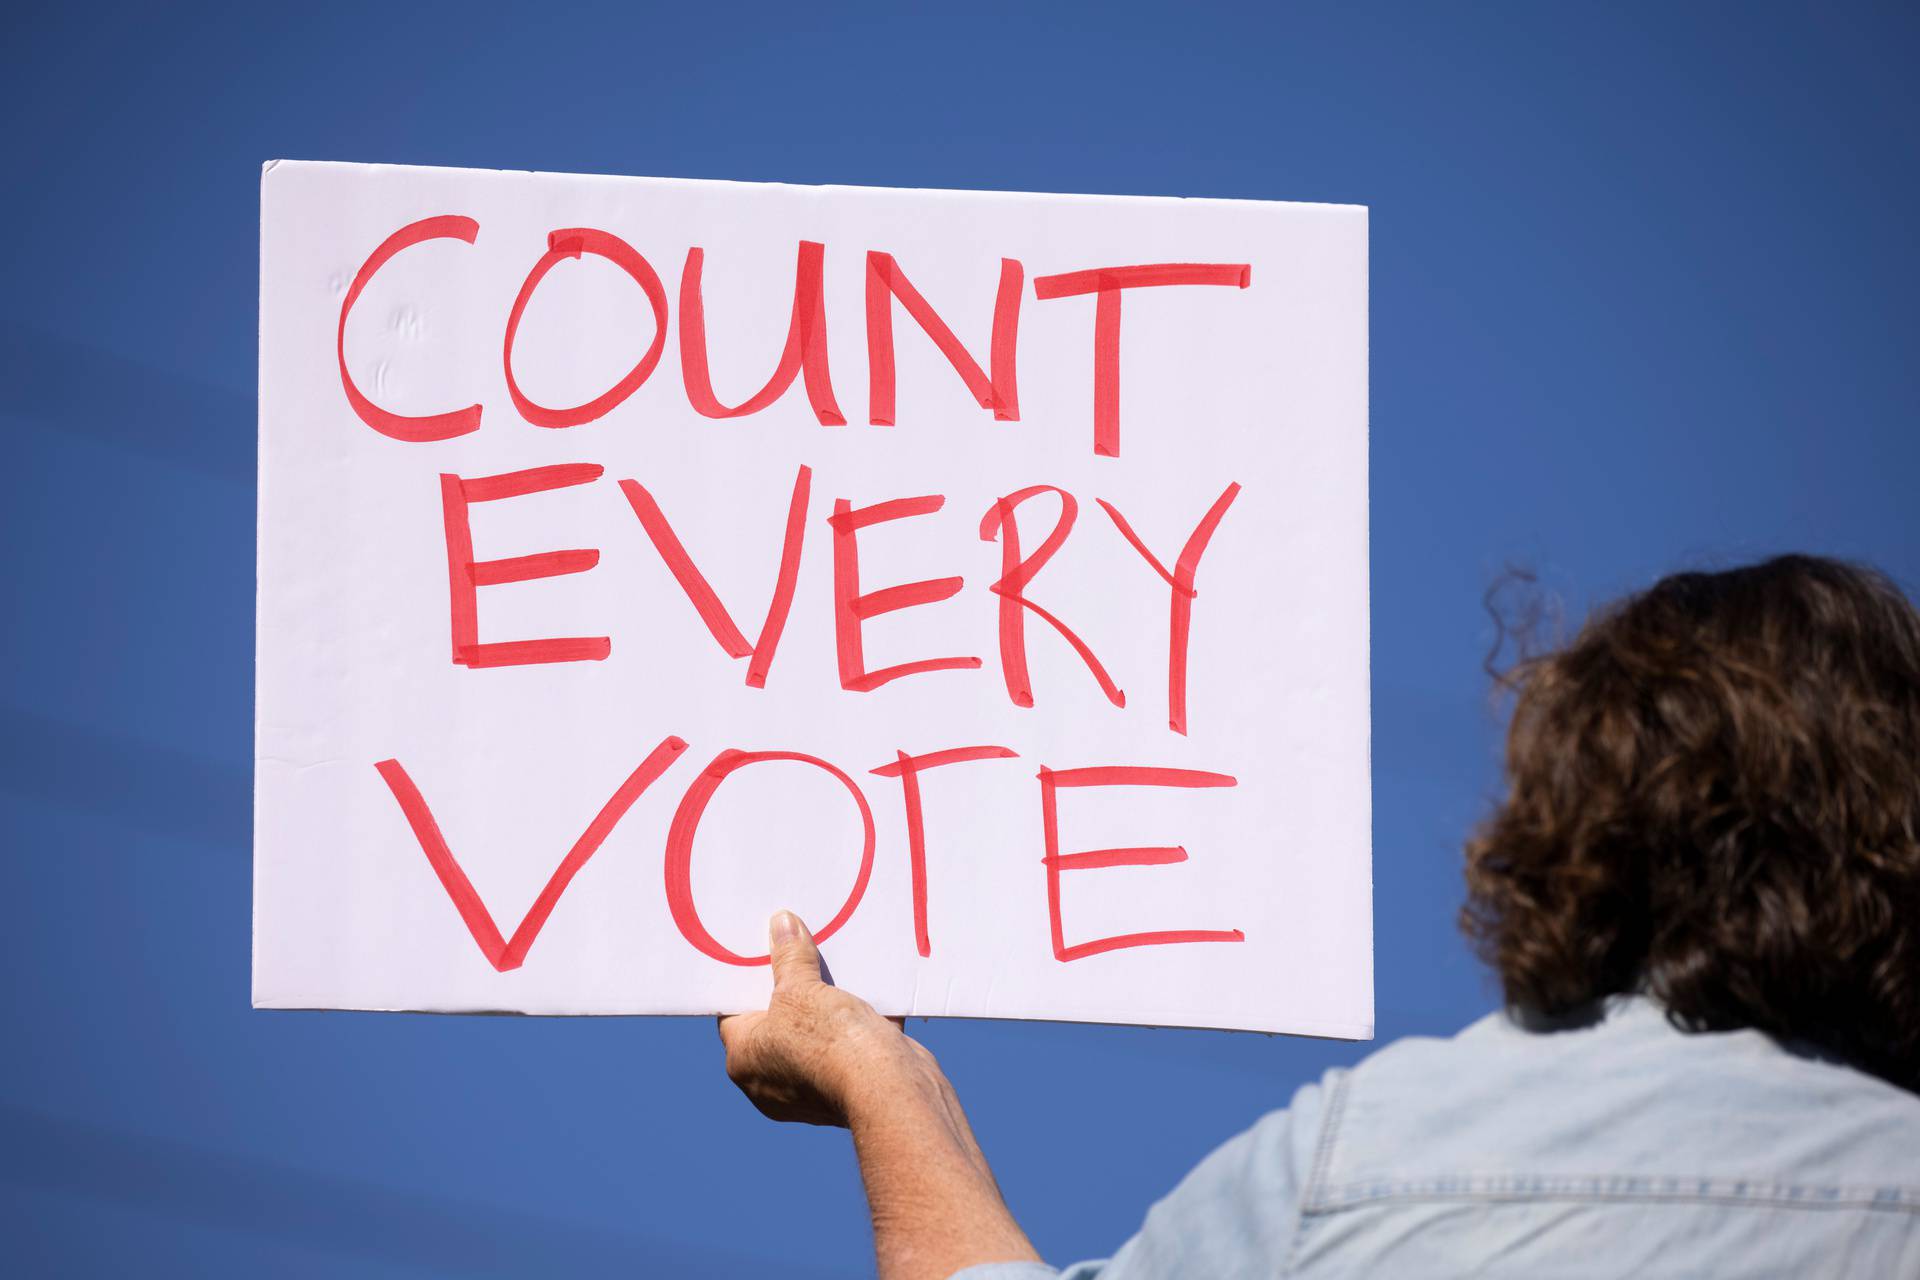 A demonstrator from protect the results coalition protests against efforts to not count all the votes in the general election as they demonstrate in Poway, California